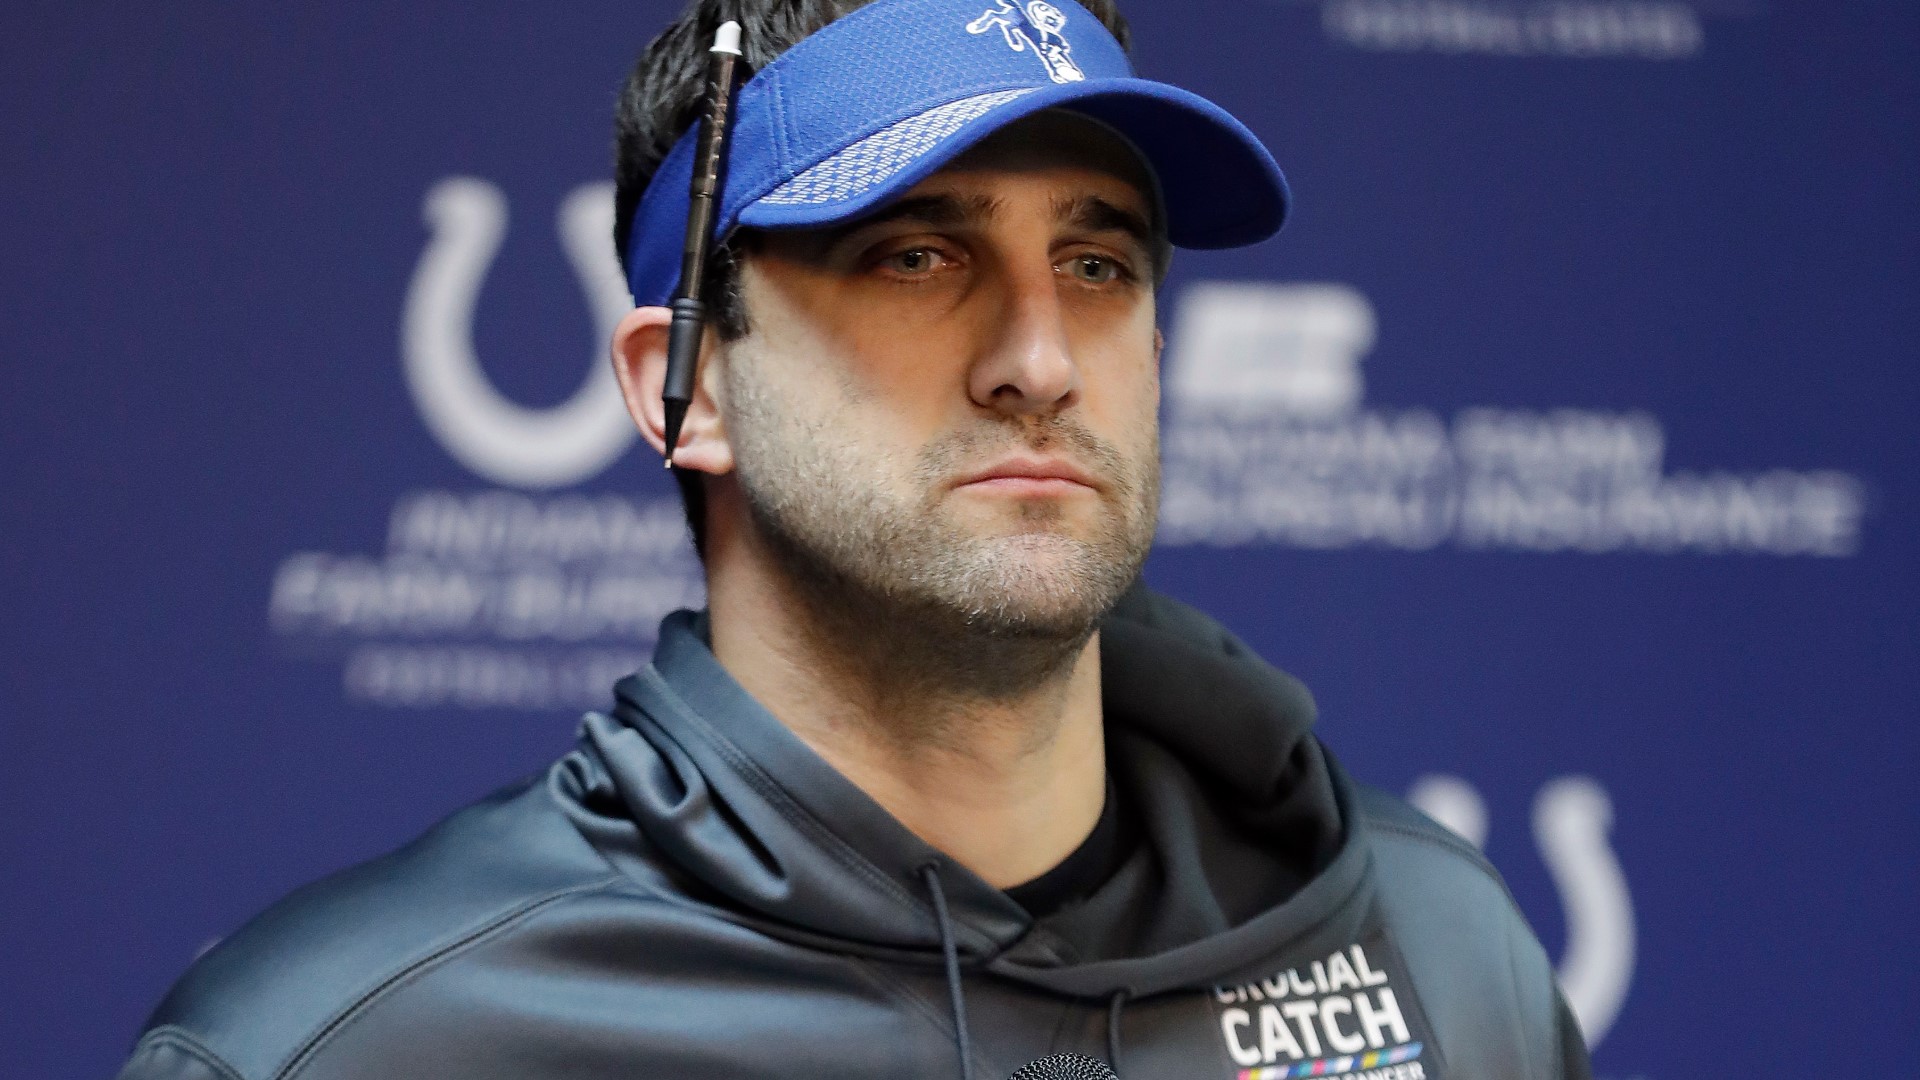 Sirianni had joined the Colts in 2018 as part of head coach Frank Reich's crew.